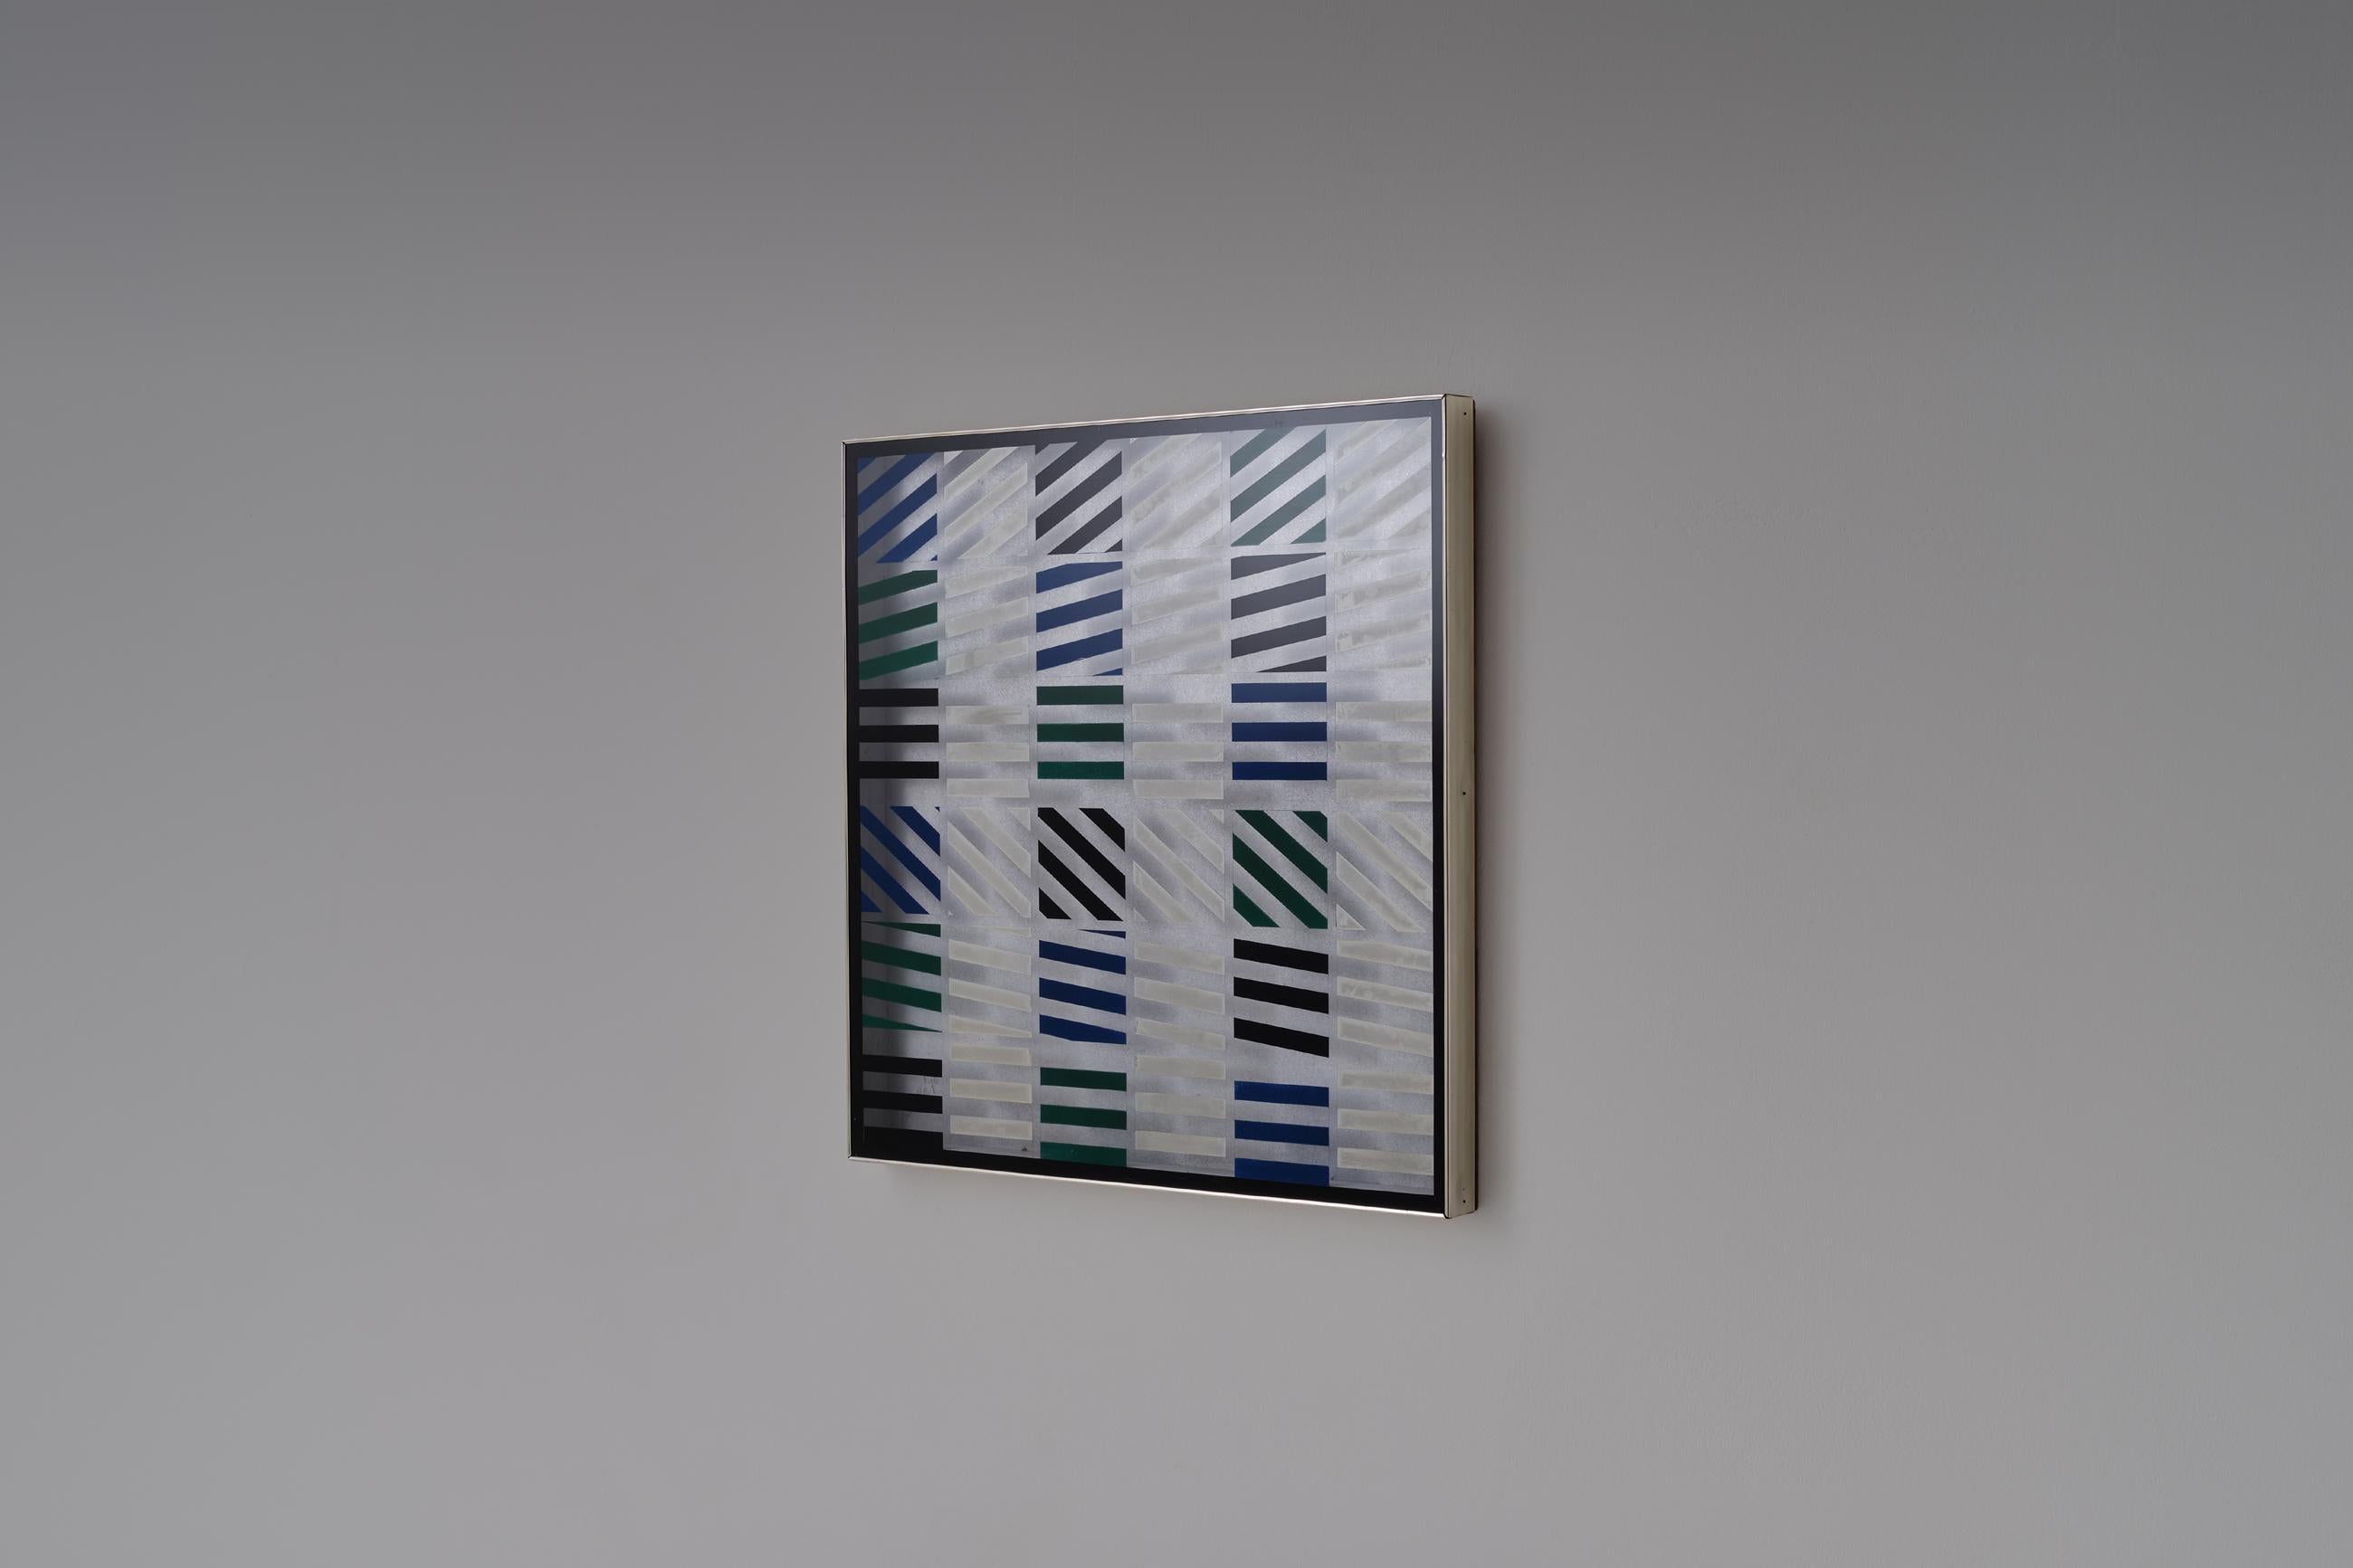 Interesting artwork 'Mathematiek' by Estelle Bilderbeek, the Netherlands, 1976. Interesting and playful artwork with a hand painted graphic pattern. The graphic pattern in green, blue, black and white is directly painted on the transpart acryl glass